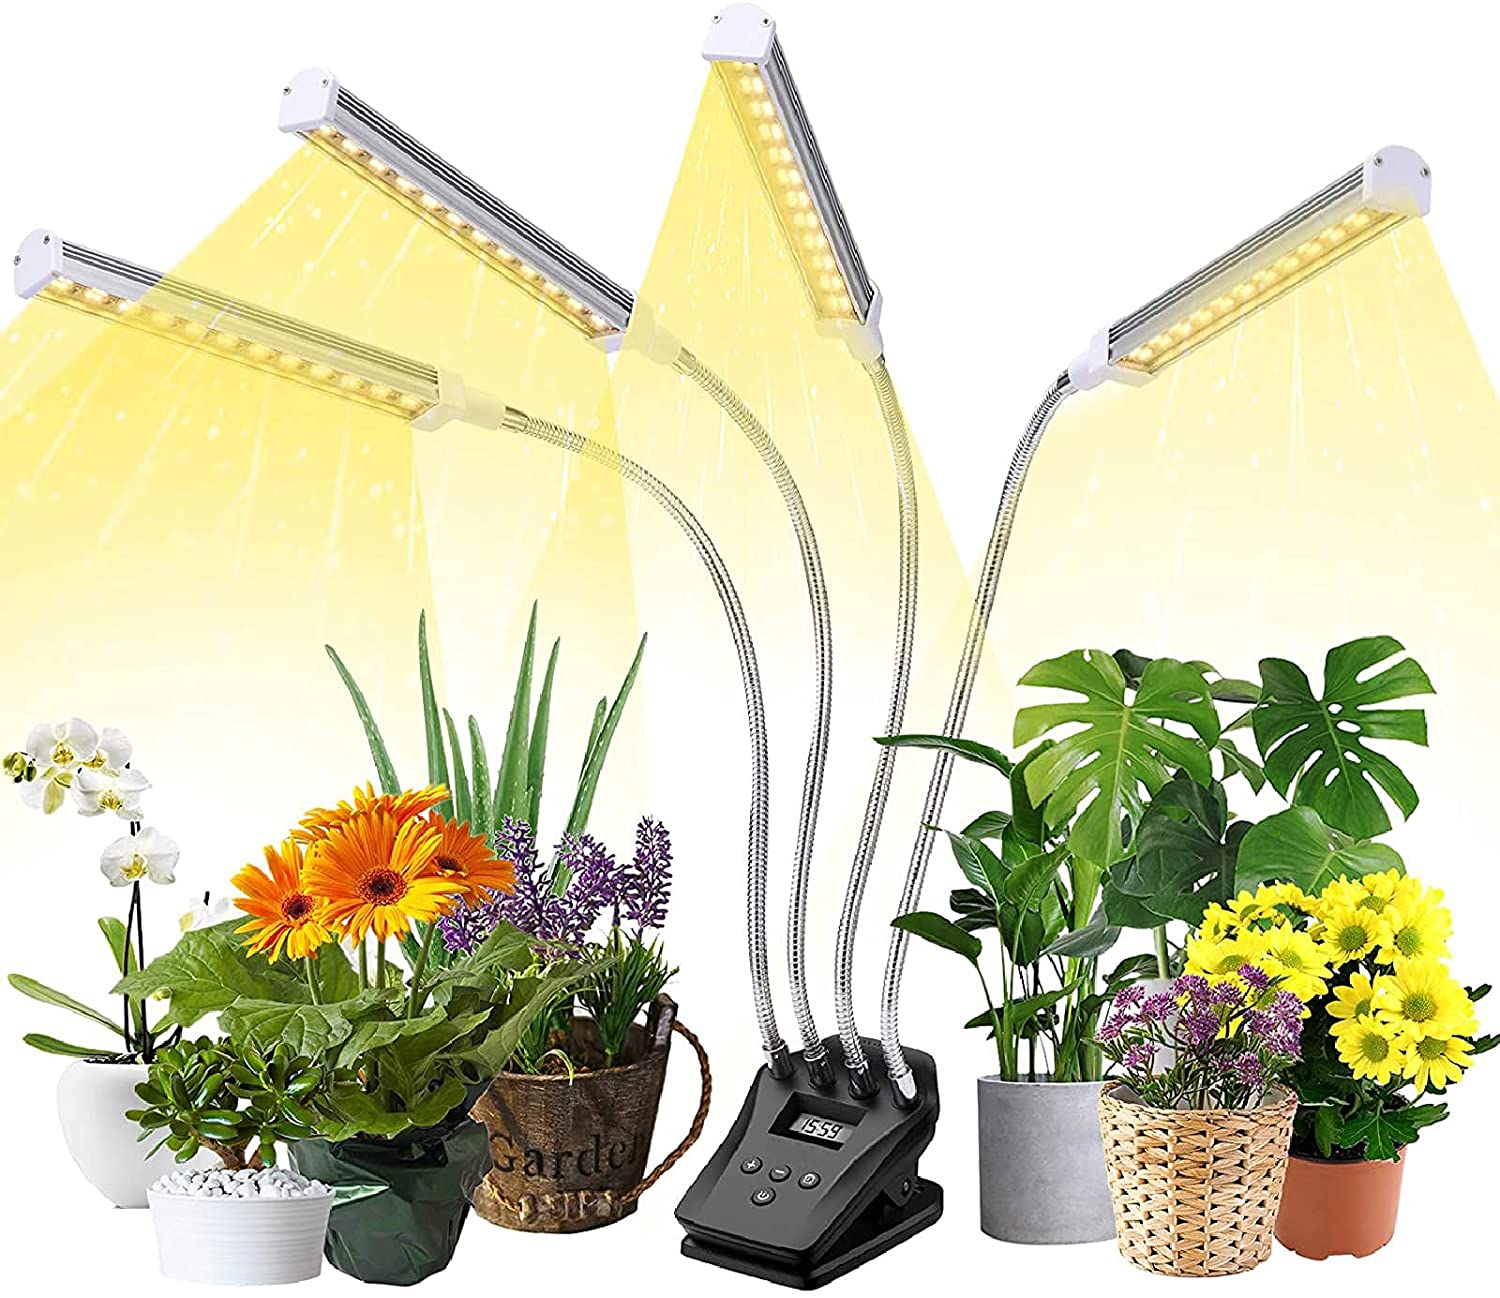 ''Plant Grow Light, Full Spectrum Grow Light for Indoor Plants with LCD Timer, Plant Growing LAMP wit